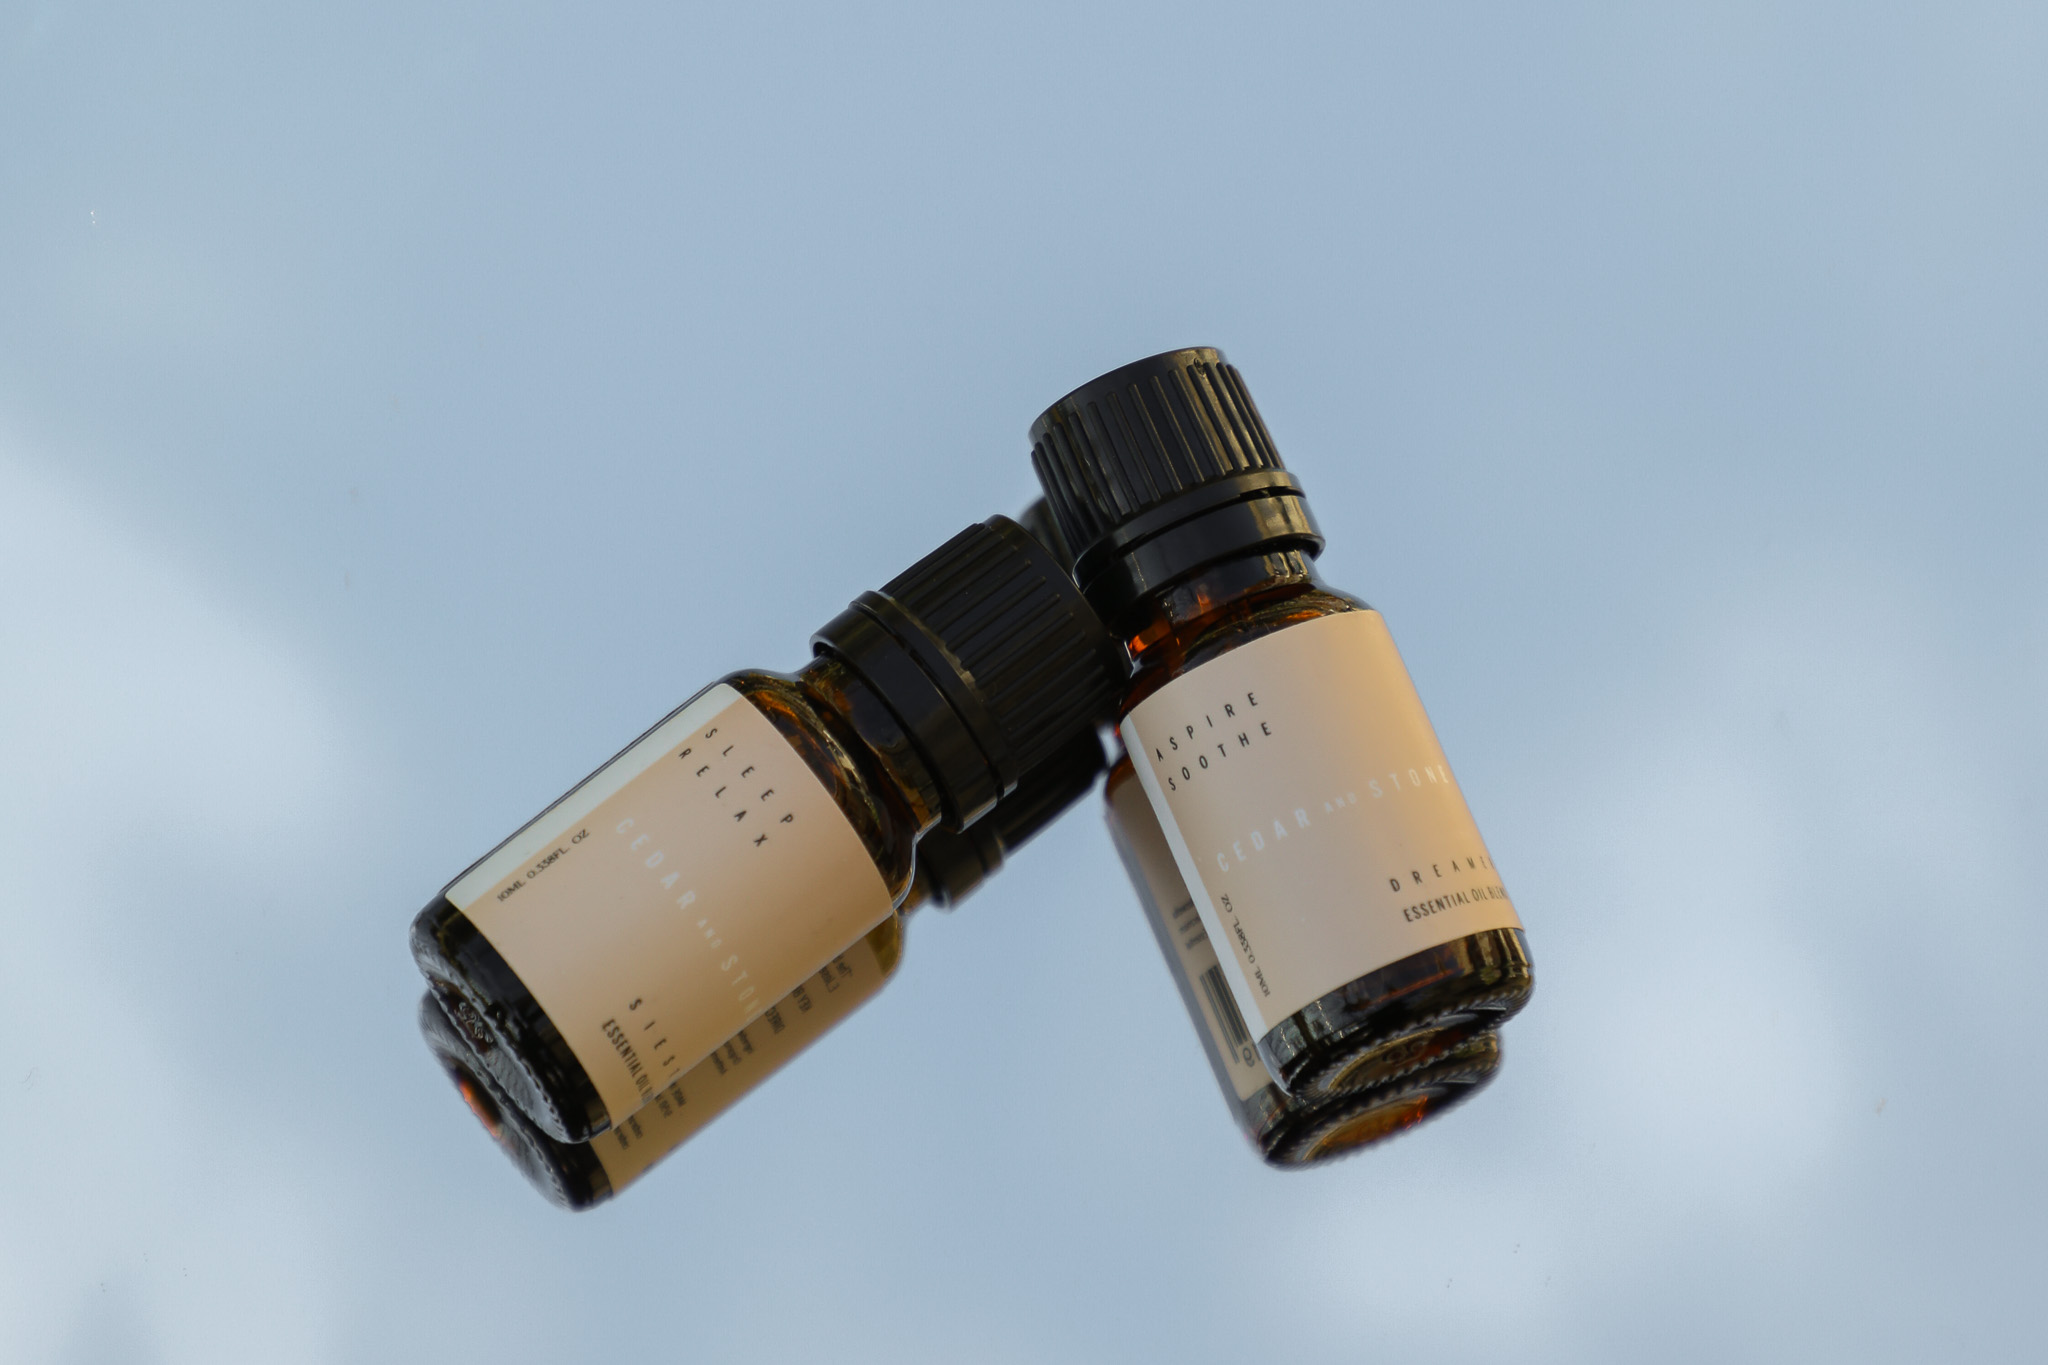 two essential oil bottles laying on a mirror reflecting the sky background